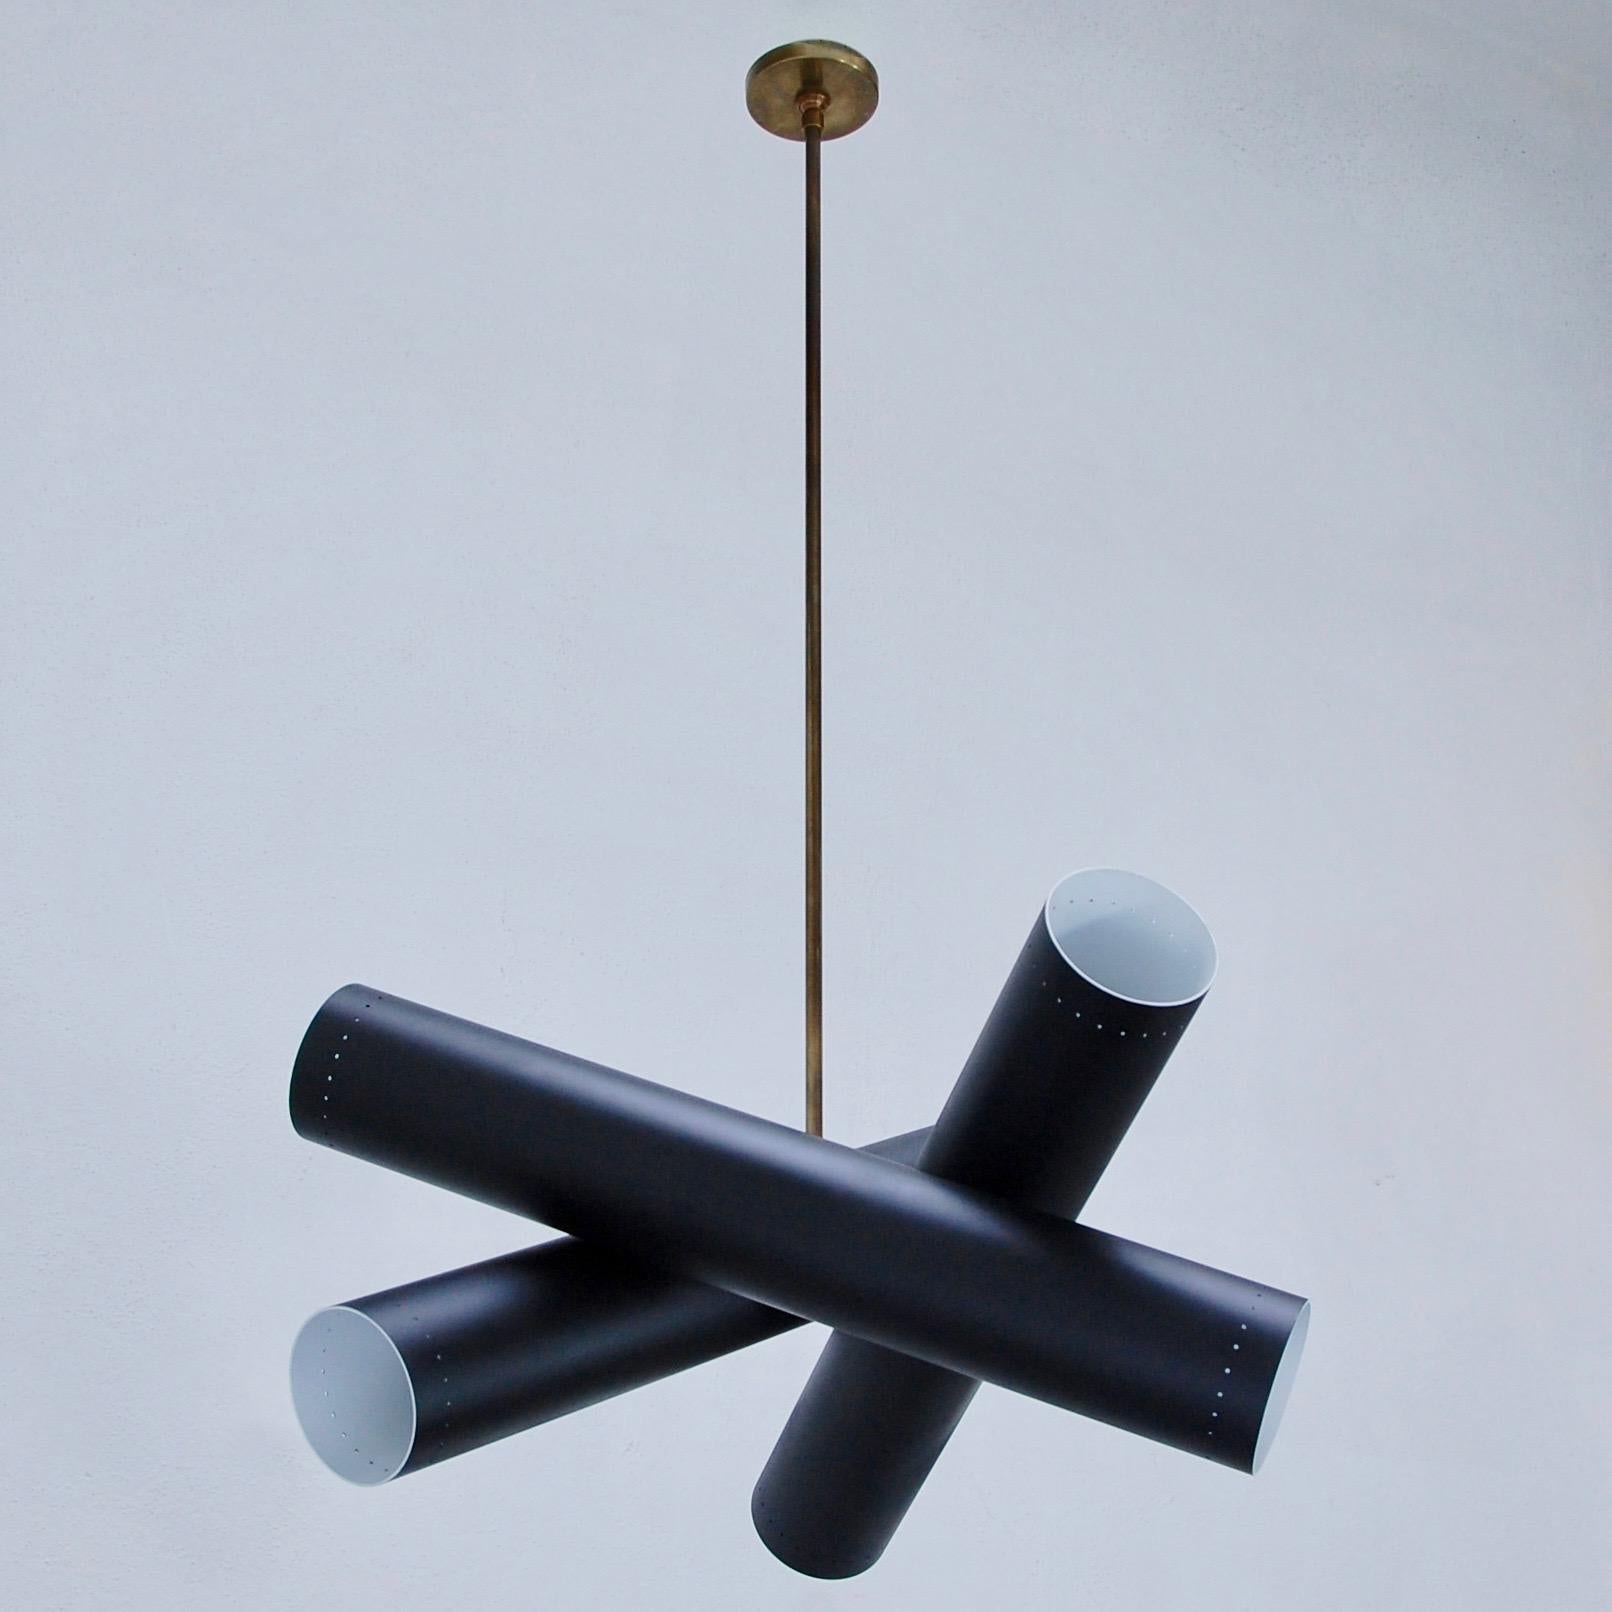 Modern, geometric Lubular pendant by Lumfardo Luminaires. Three cylindrical tubular shades criss crossing to create directional light. Made to order. Brass and painted aluminium finish. Custom finish and OAD can be made upon request. Two E26 medium